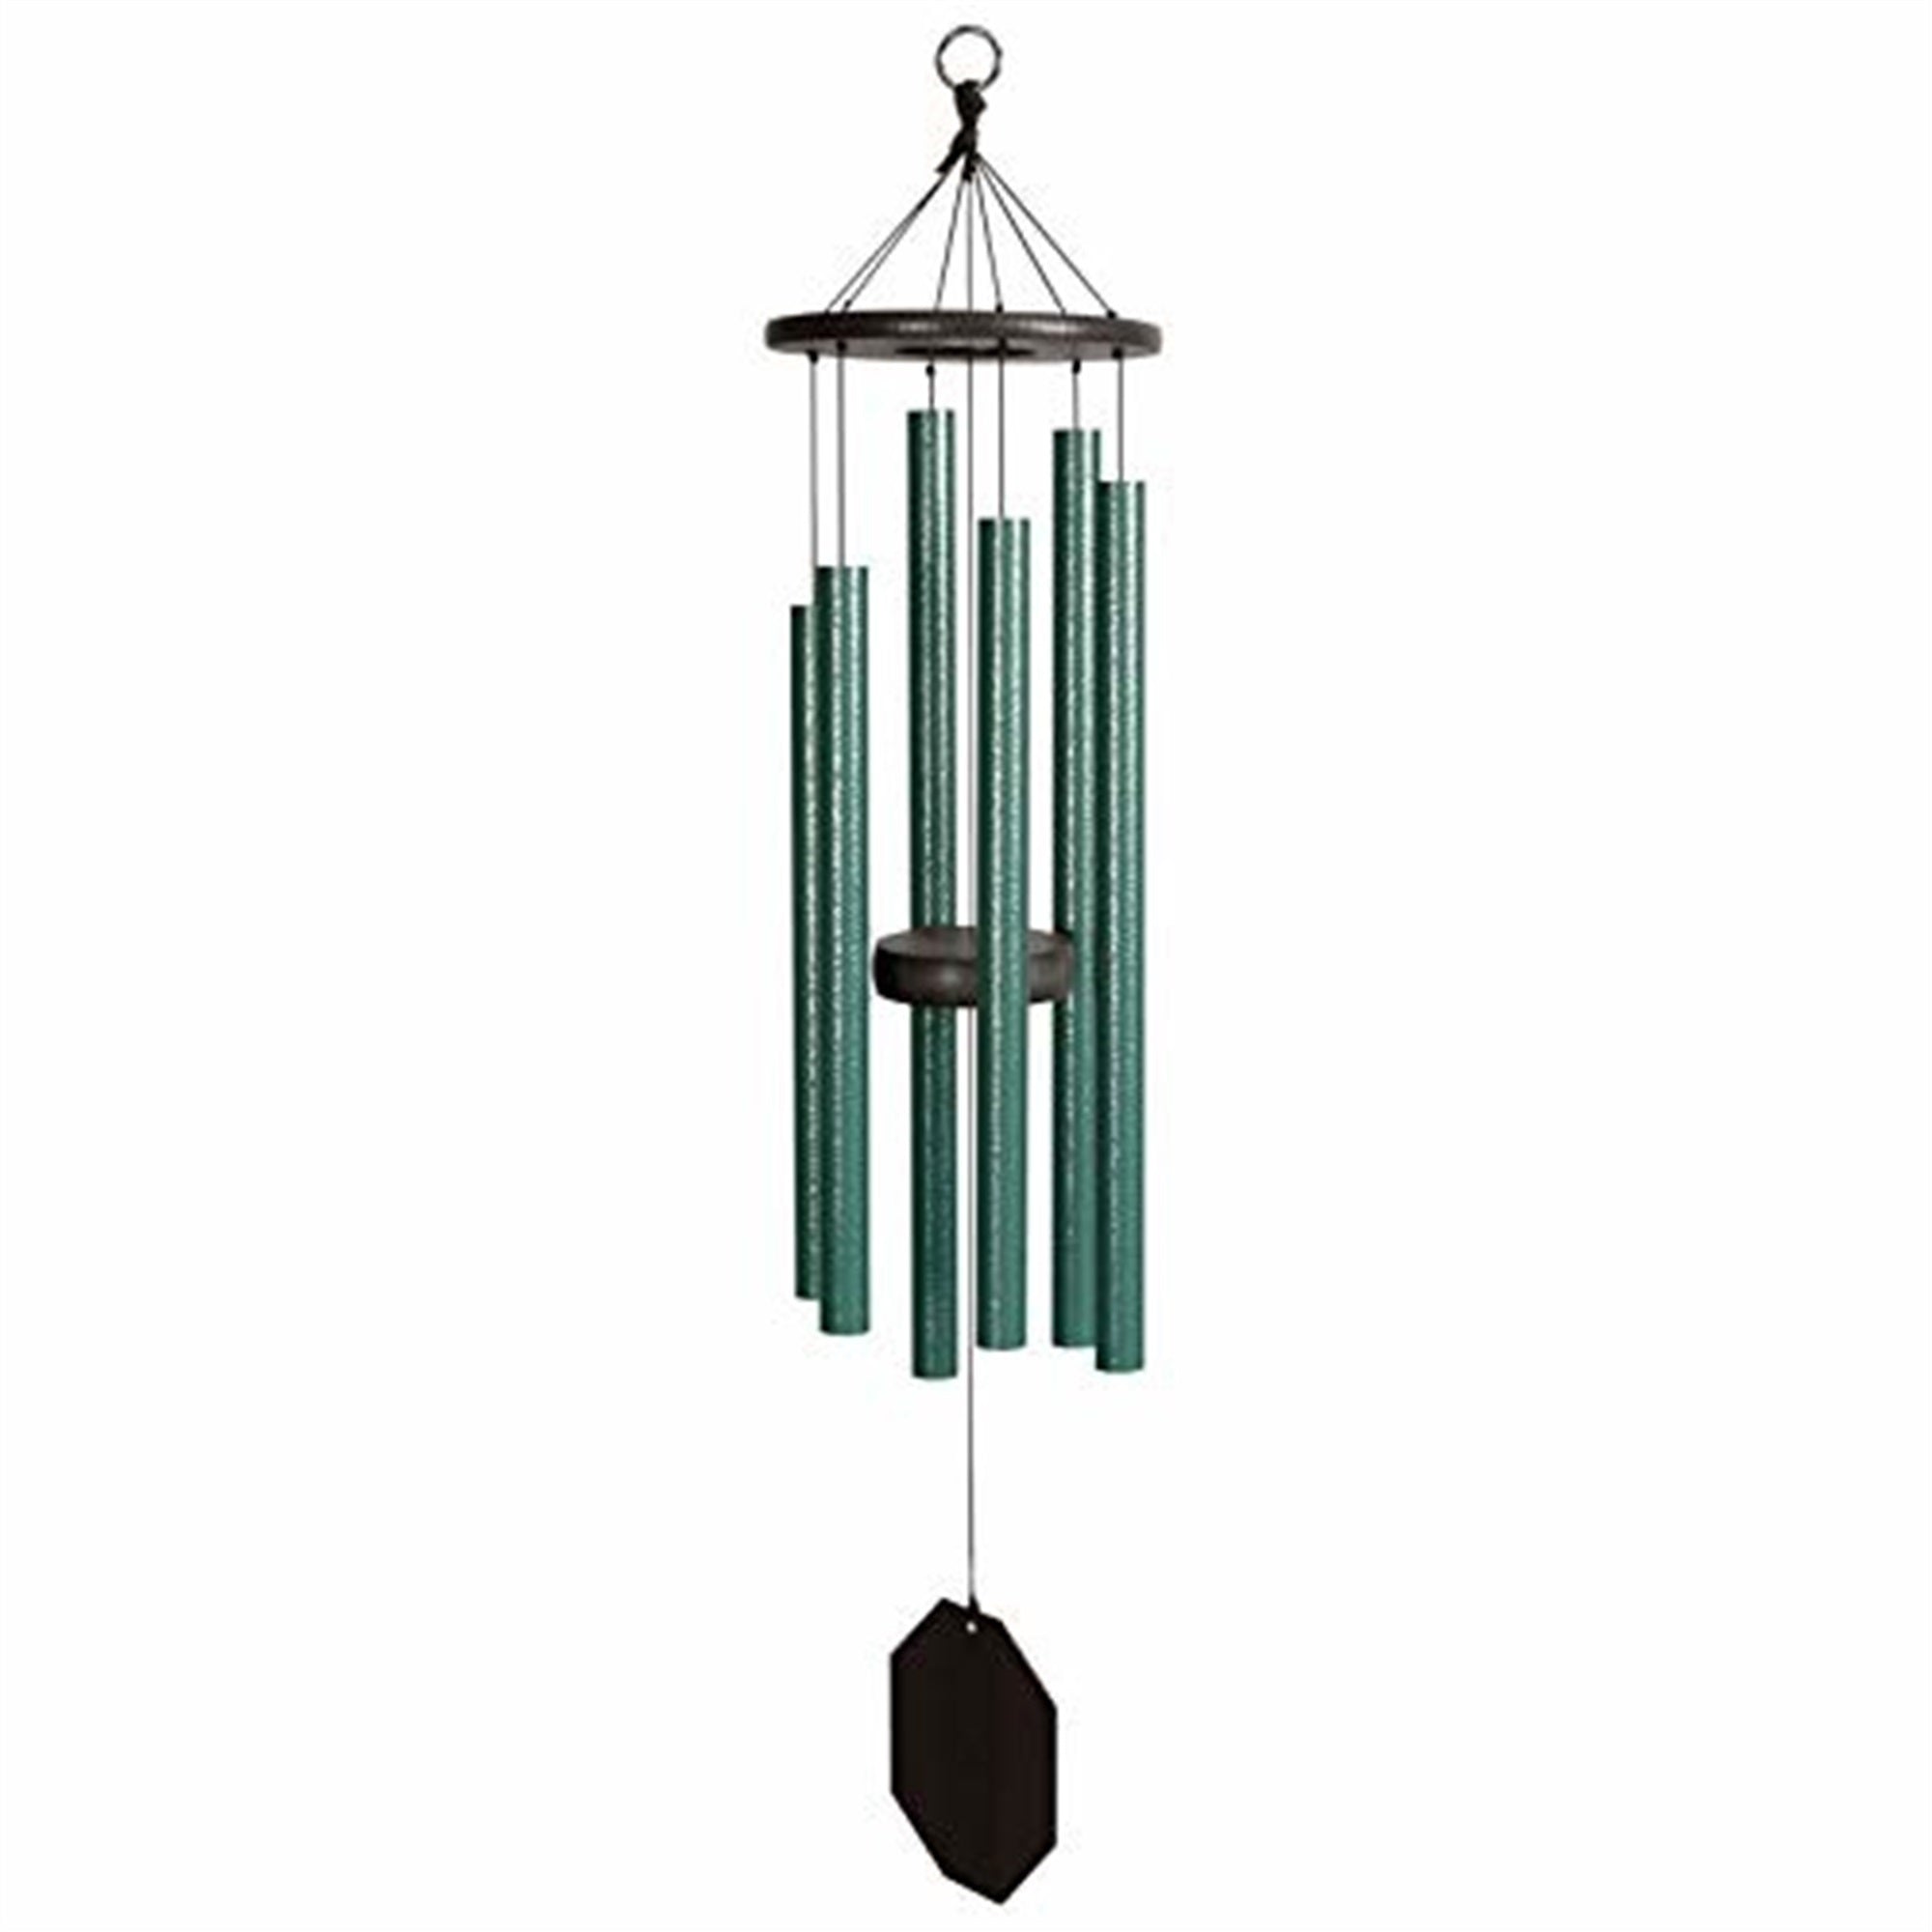 Lambright Country Chimes, Amish Crafted Songbird Wind Chime, 36 Inches